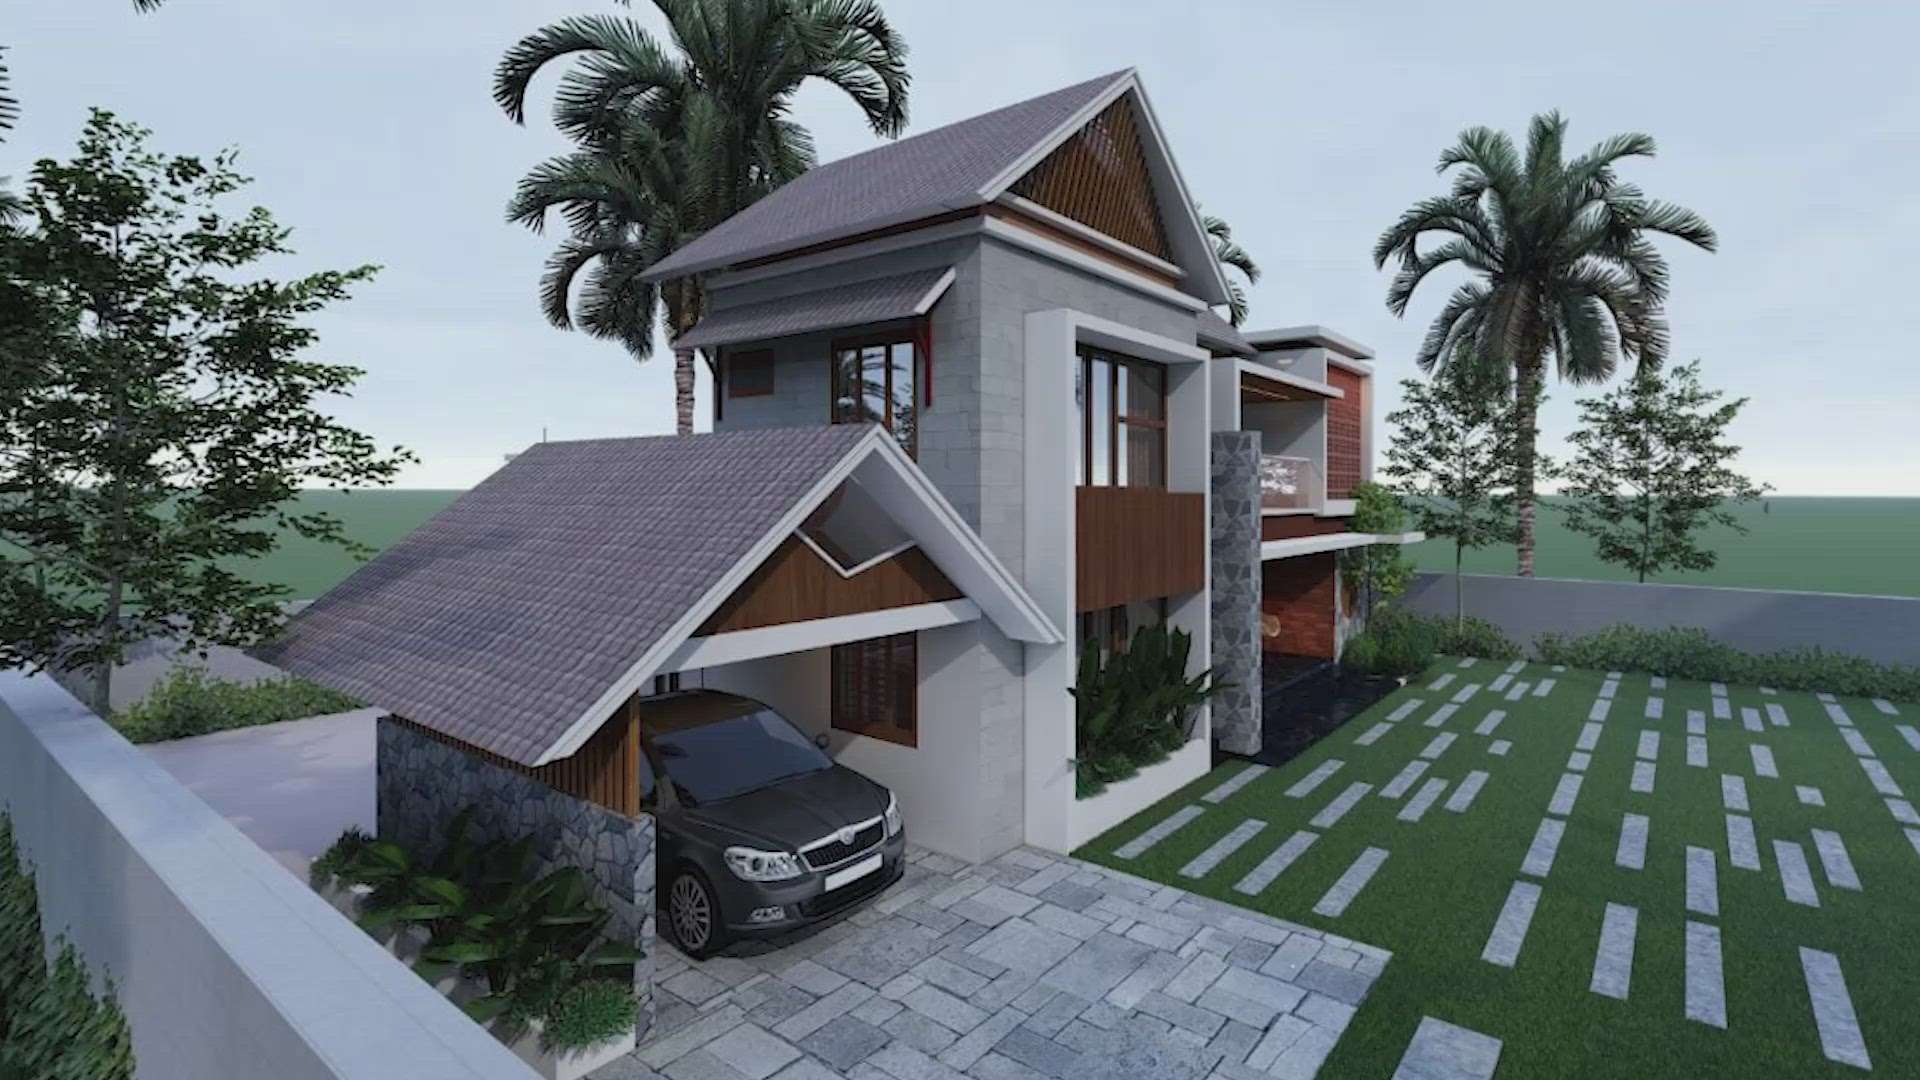 3BHK 2749 sq ft
Contact us immediately at 8055234222 for 3d visualization, interior designing and construction requirements. 

 #ivoeryhomes  #ivoeryhomesanddevelopers  #3d  #3Dvisualization  #InteriorDesigner  #Architect  #HouseConstruction  #constructioncompany  #ConstructionCompaniesInKerala